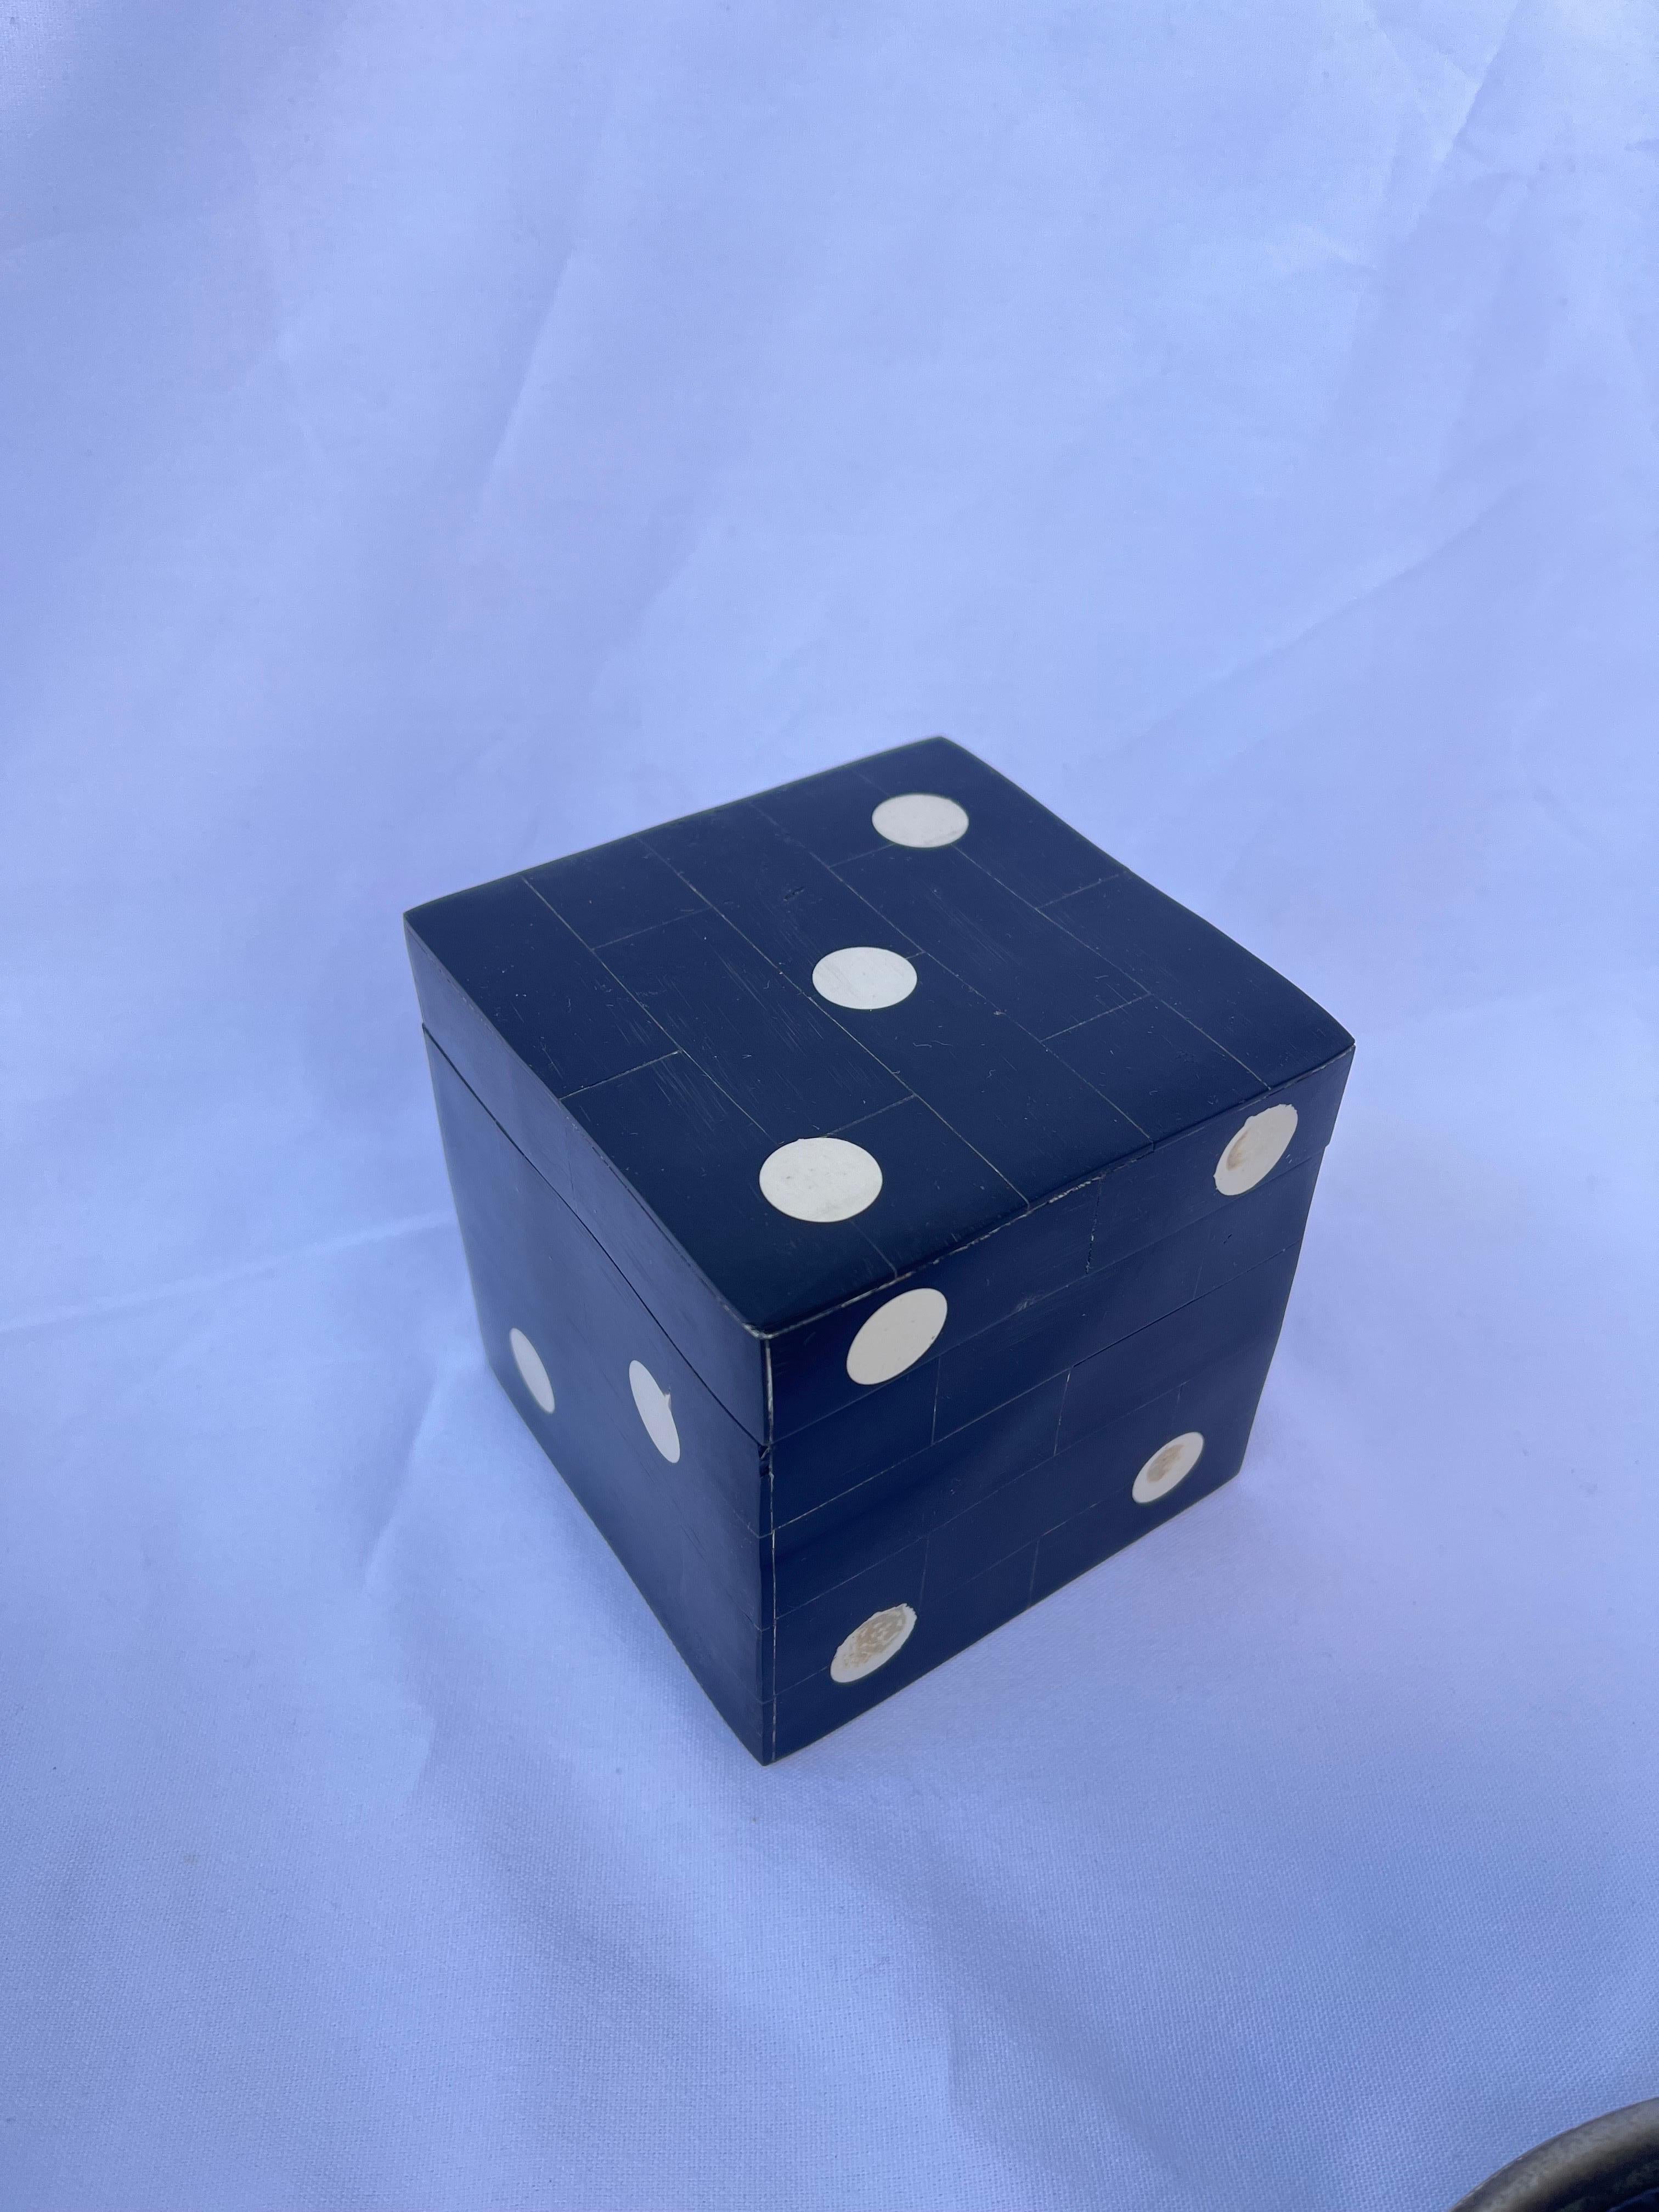 Bone Tessellated Vintage Dice or Die Lidded Cube Box Paperweight Desk Accessory  For Sale